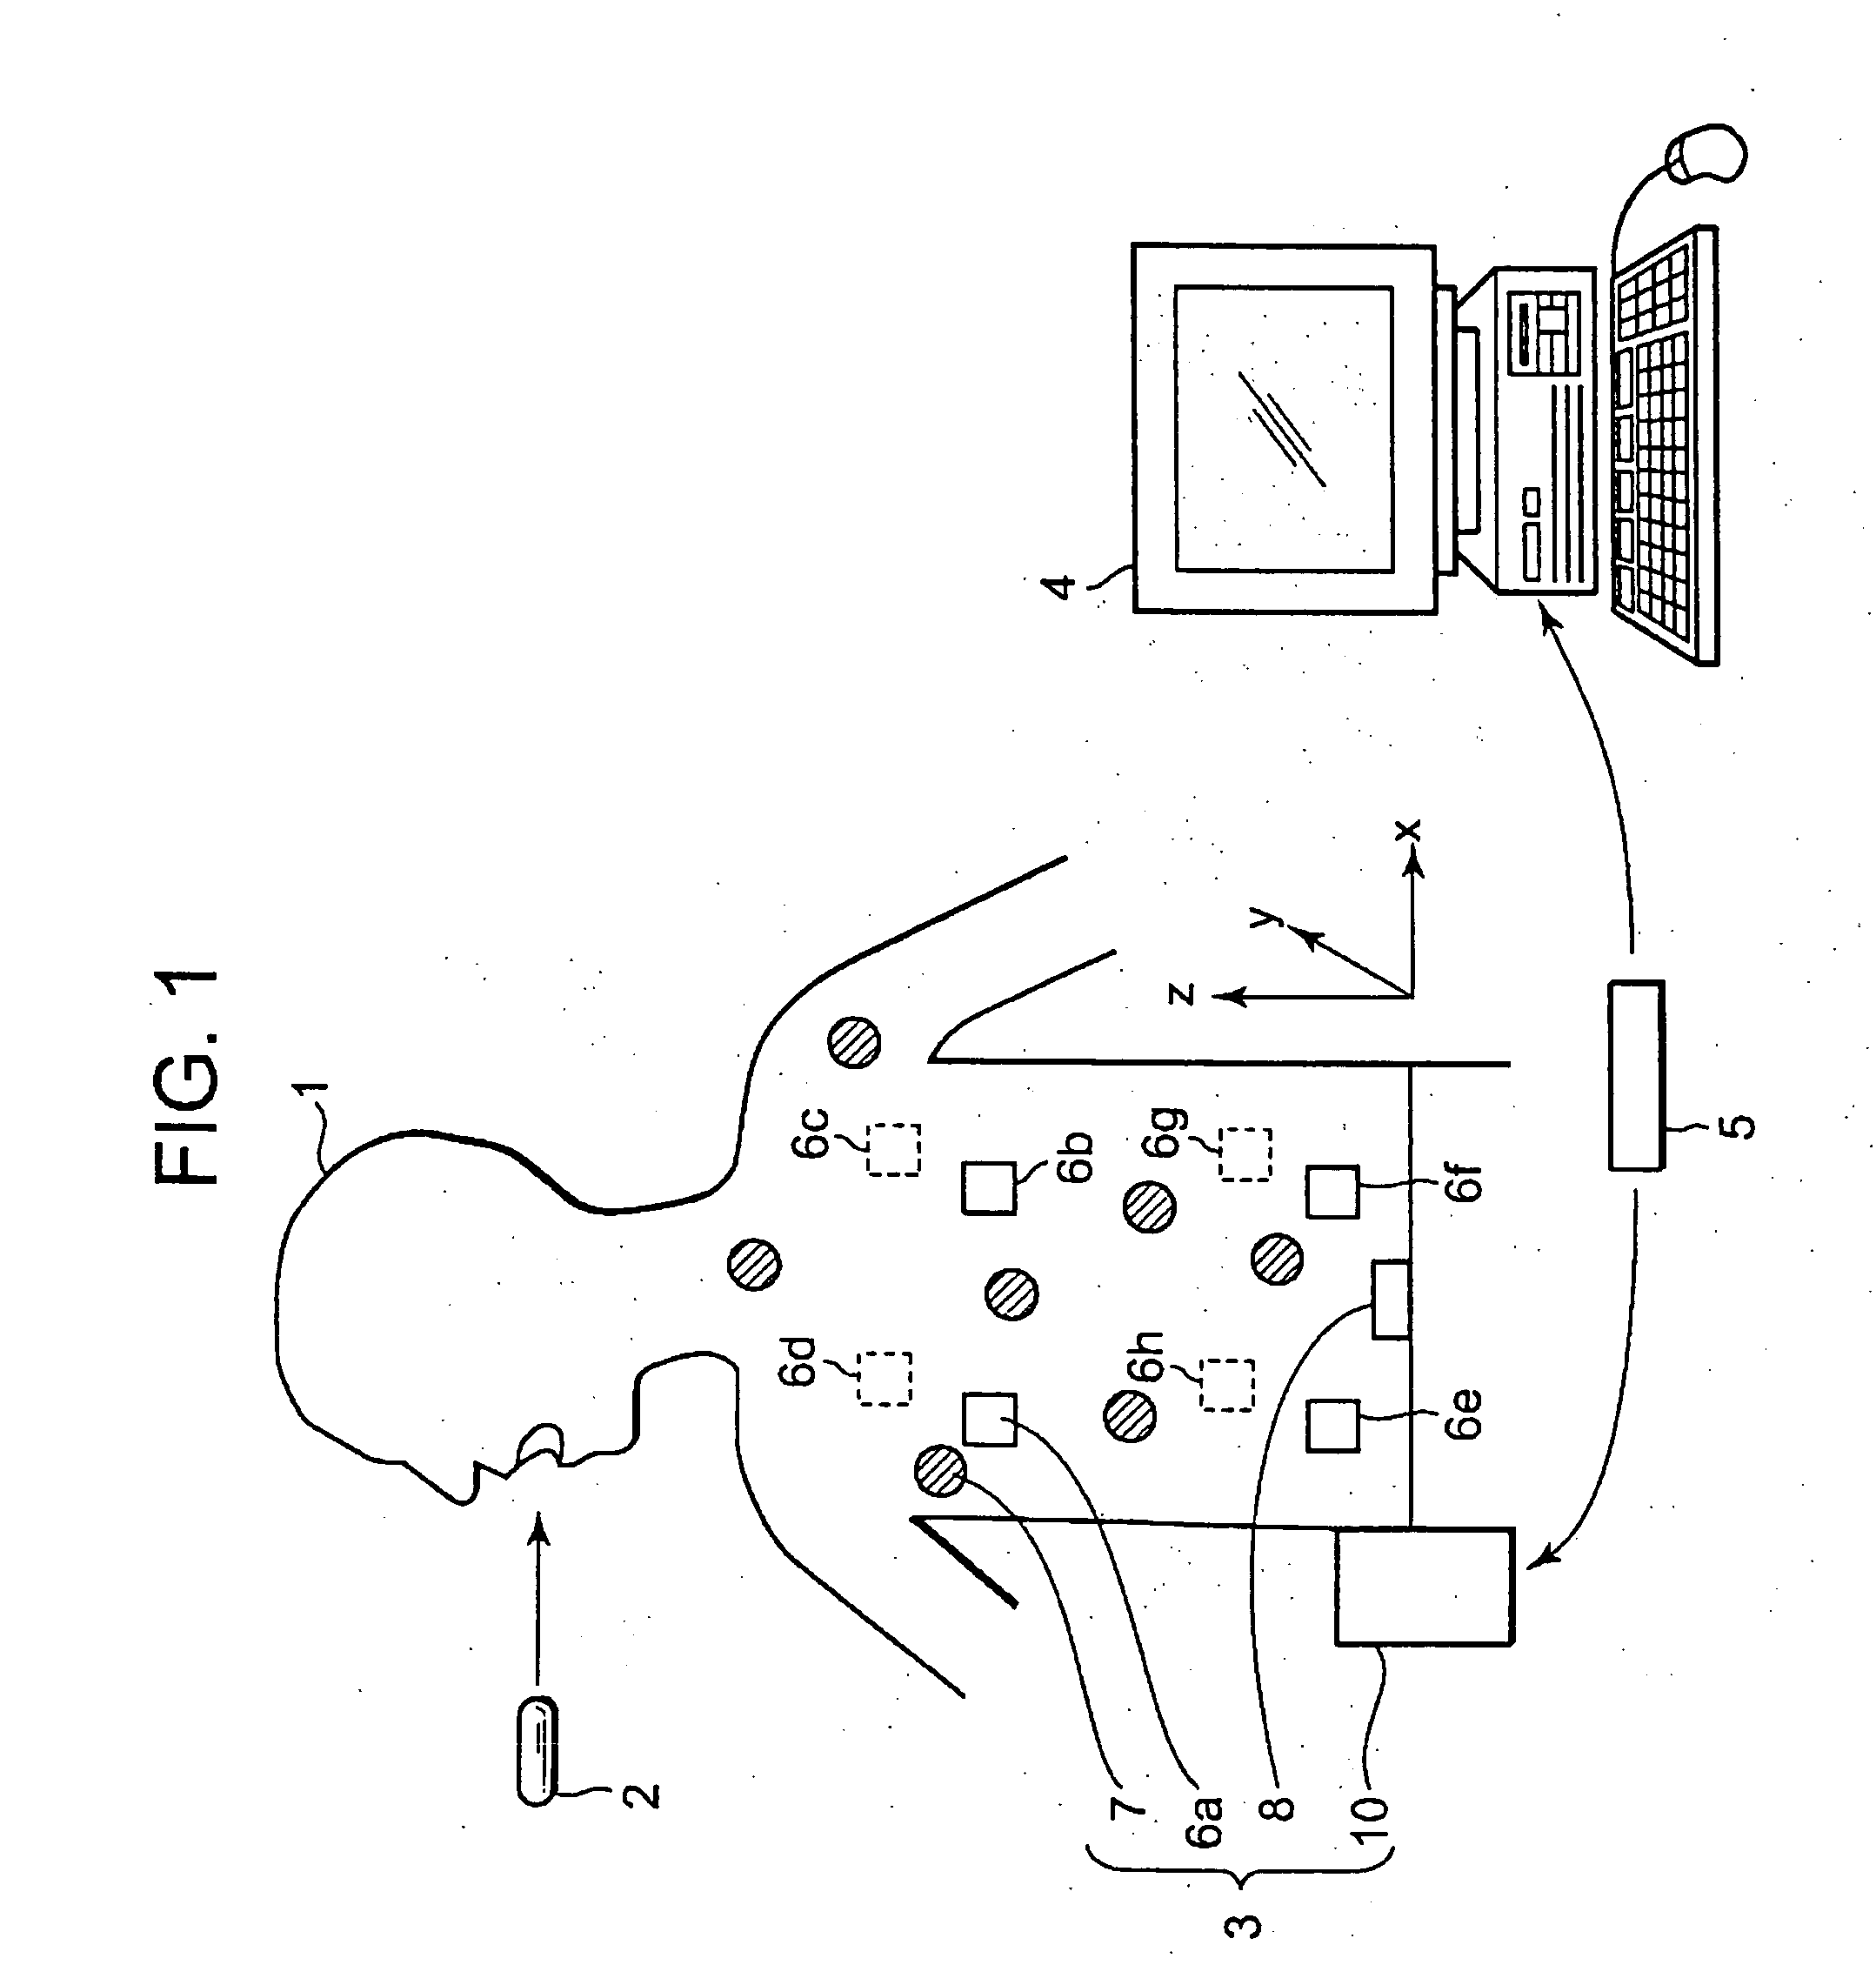 Intra-subject position display system